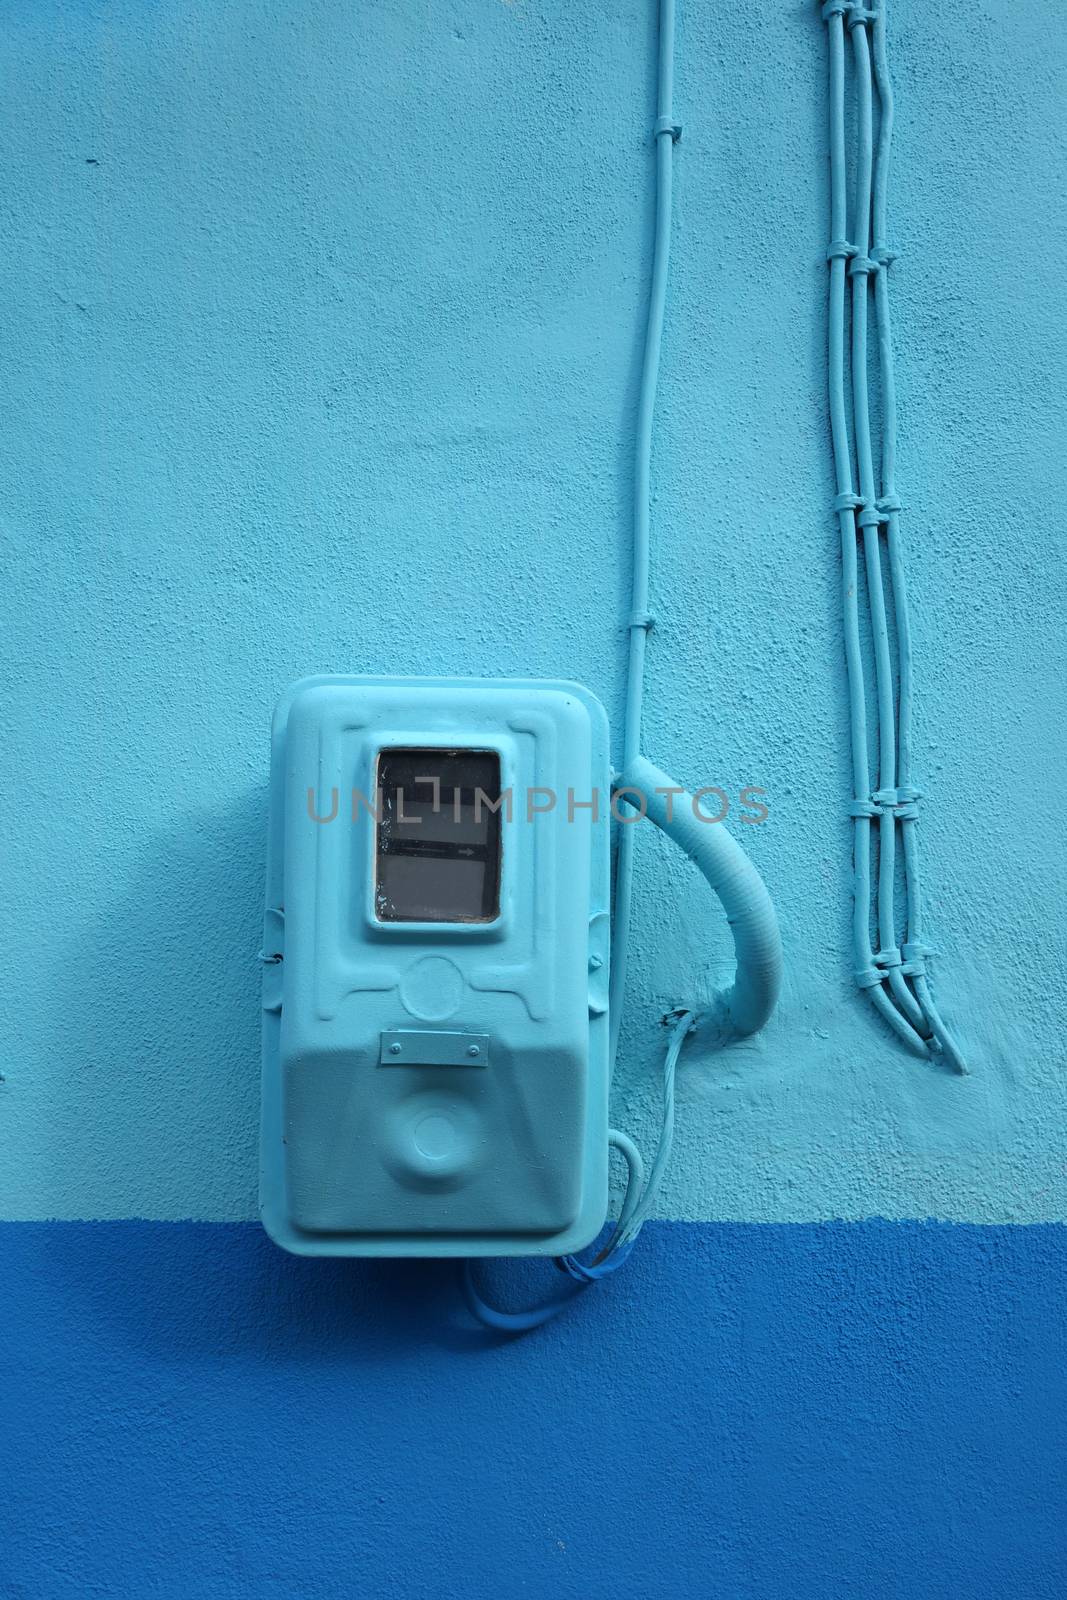 Electricity meter painted blue in harmony with the wall in Greece